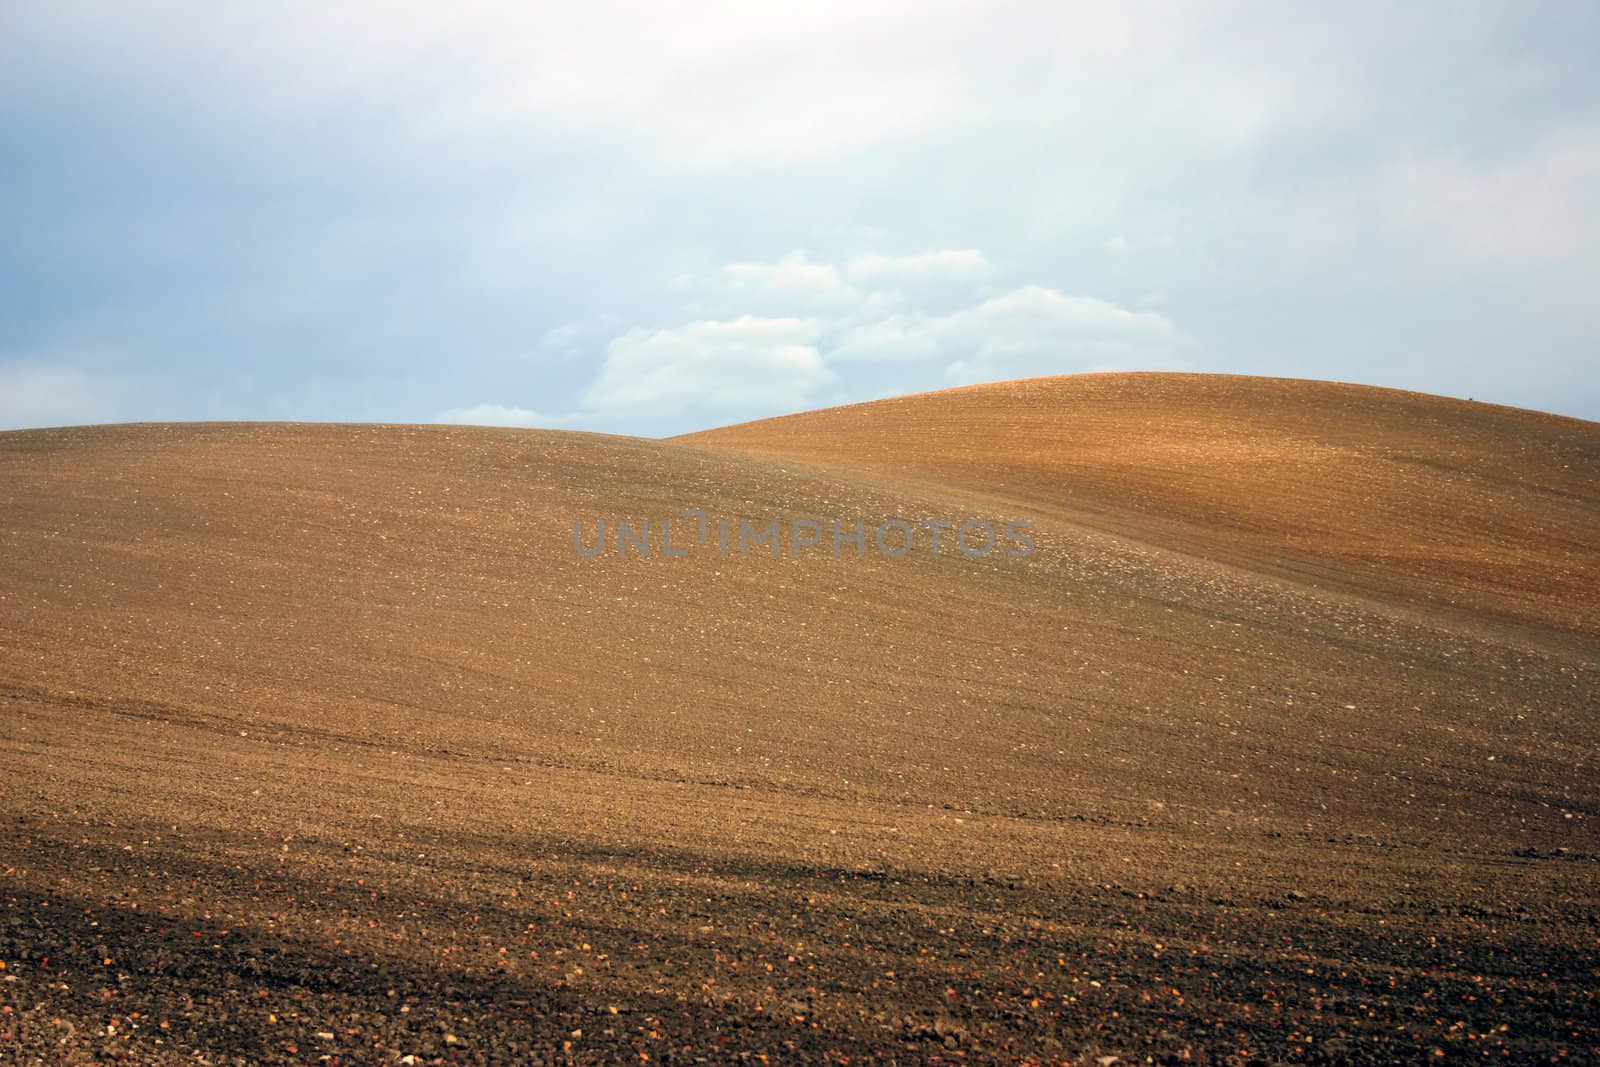 harvested and ploughed fields in Navarra, Spain